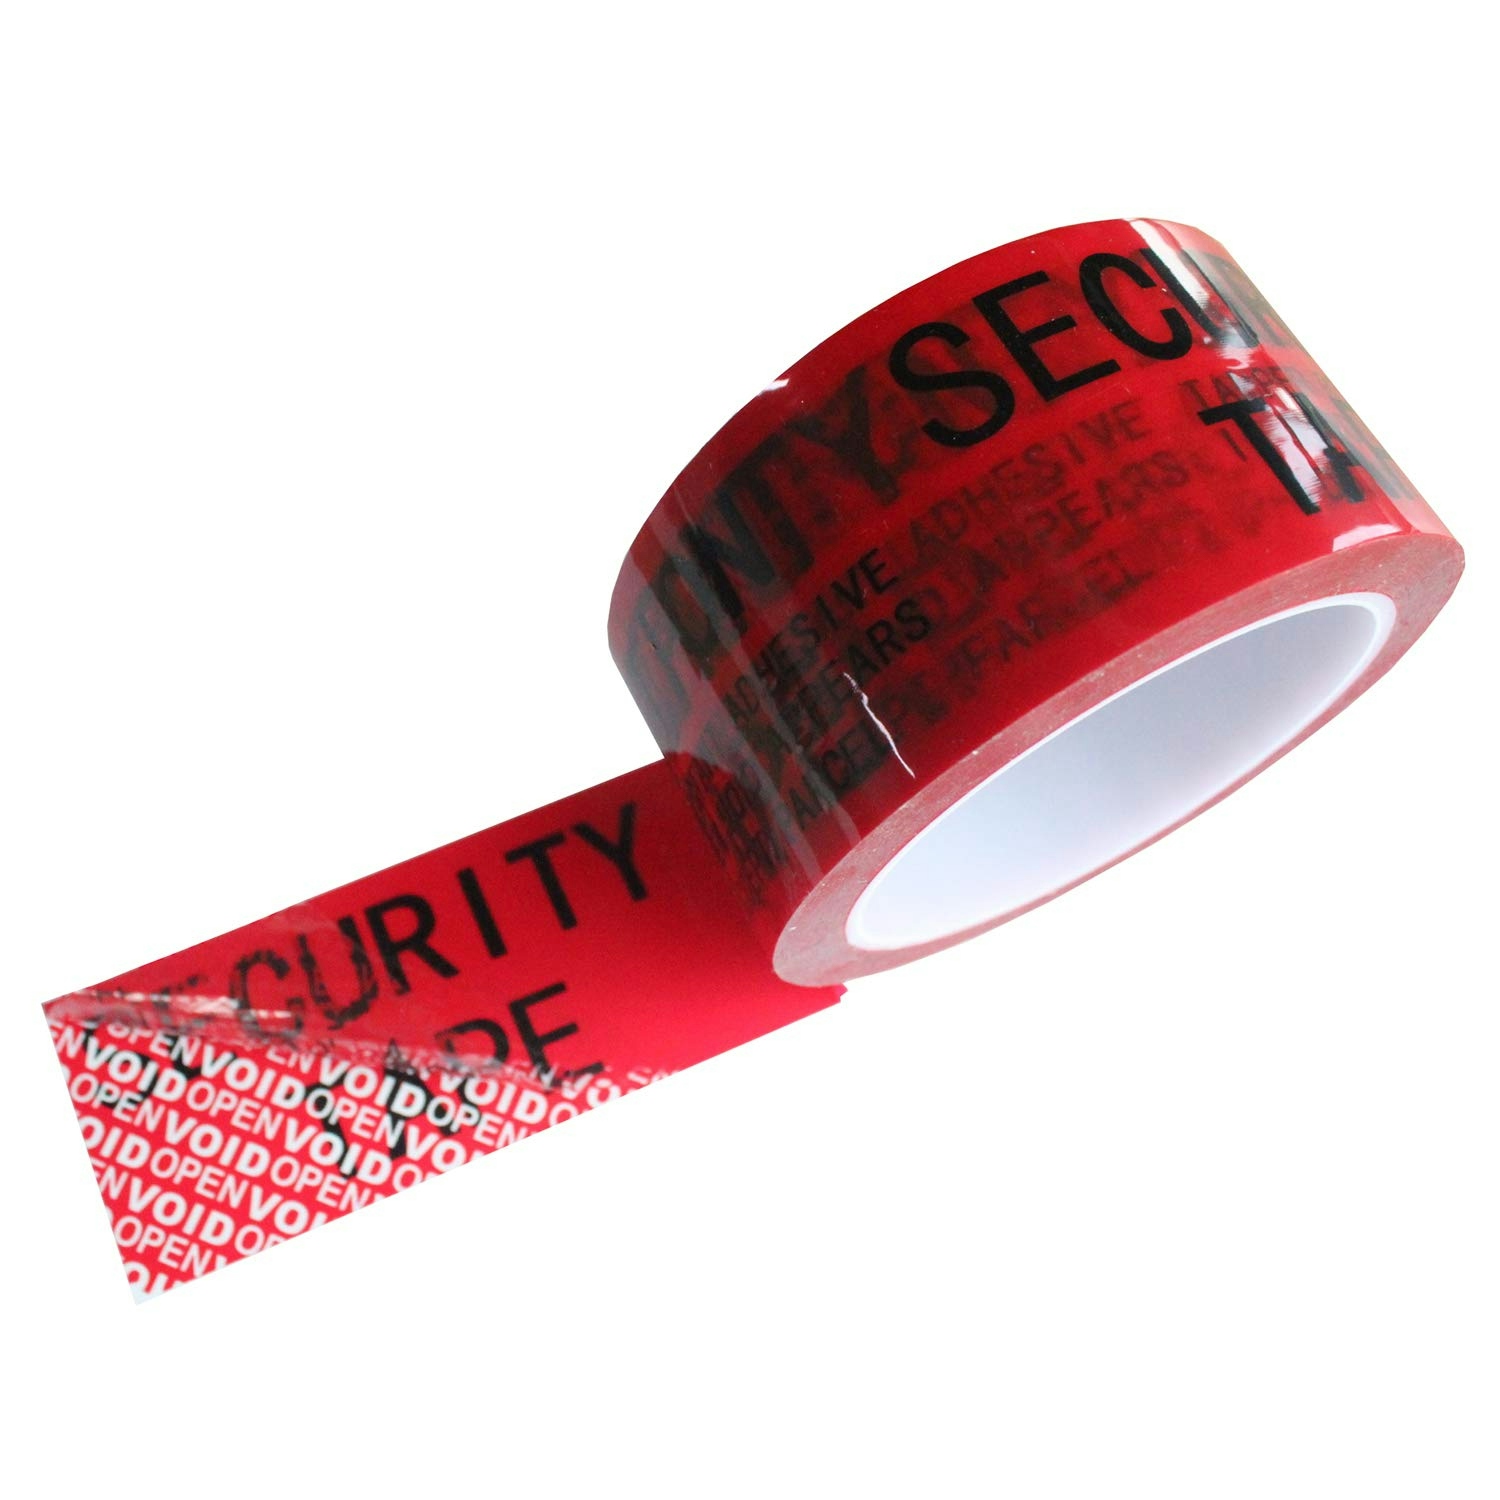 Industrial security adhesive tape. It claims not to be able to replace the tape once the box is open. Easy identification of altered packages.